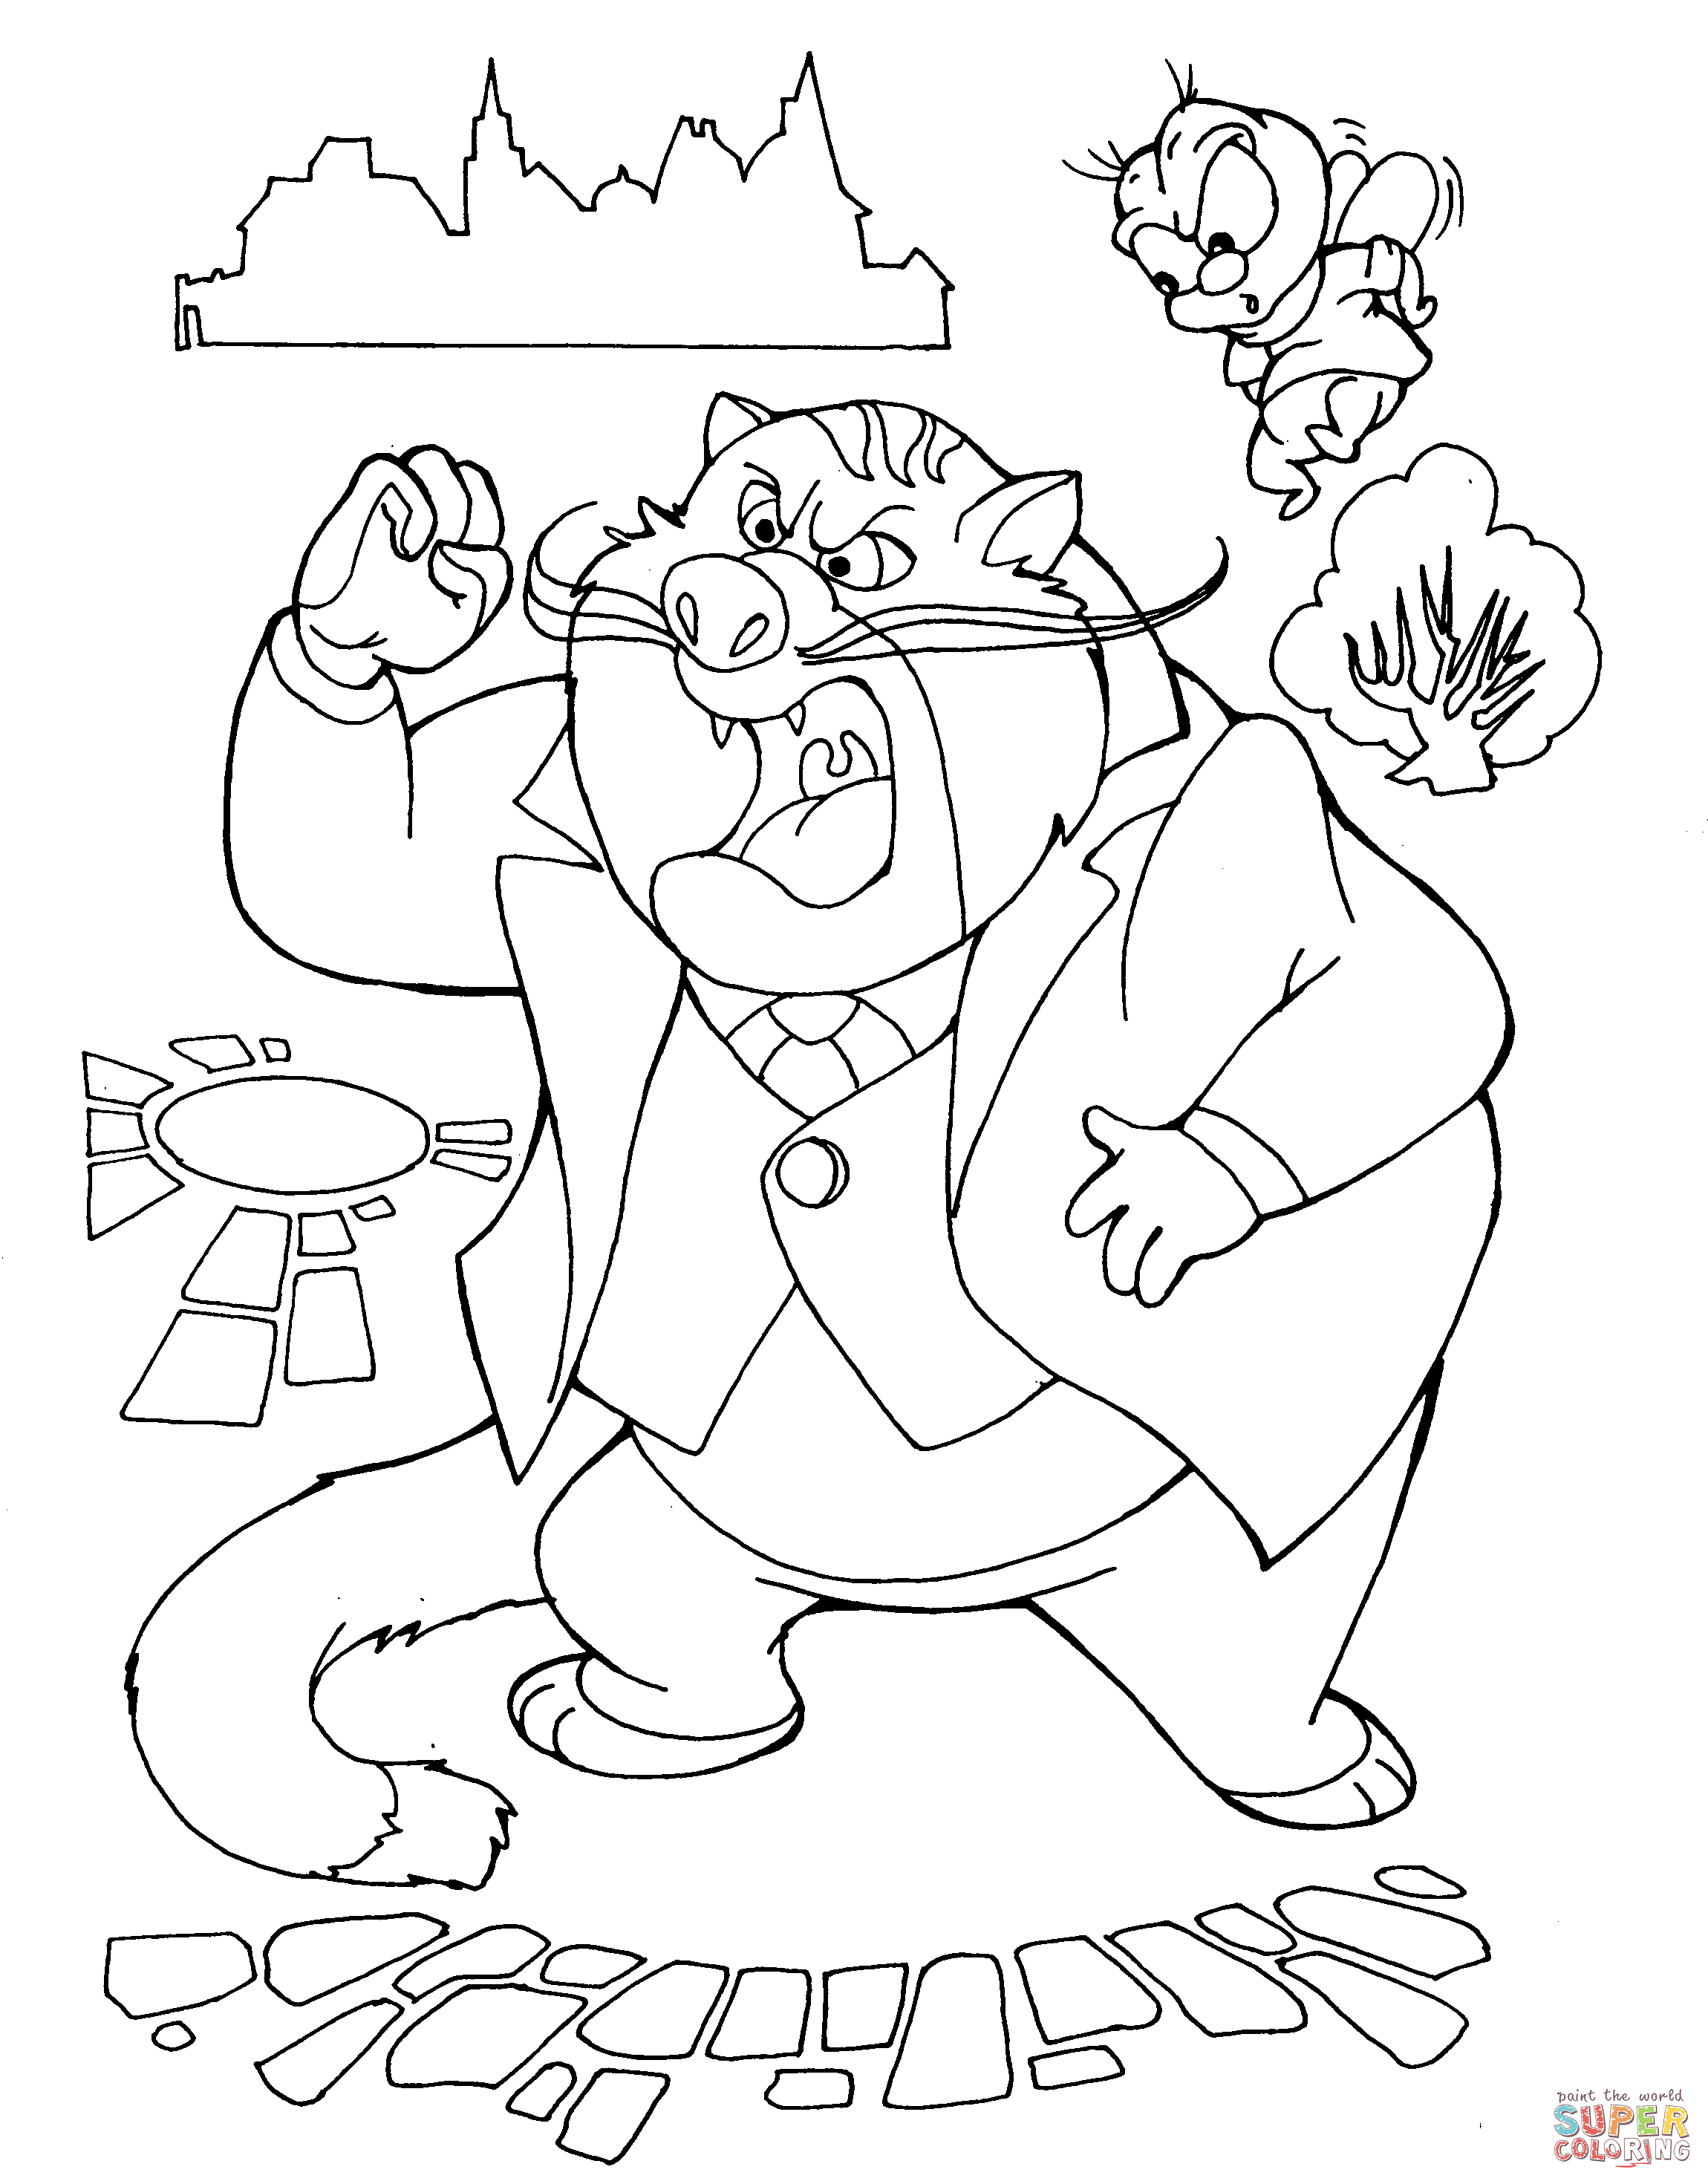 Fat Cat Is Mad coloring page | Free Printable Coloring Pages